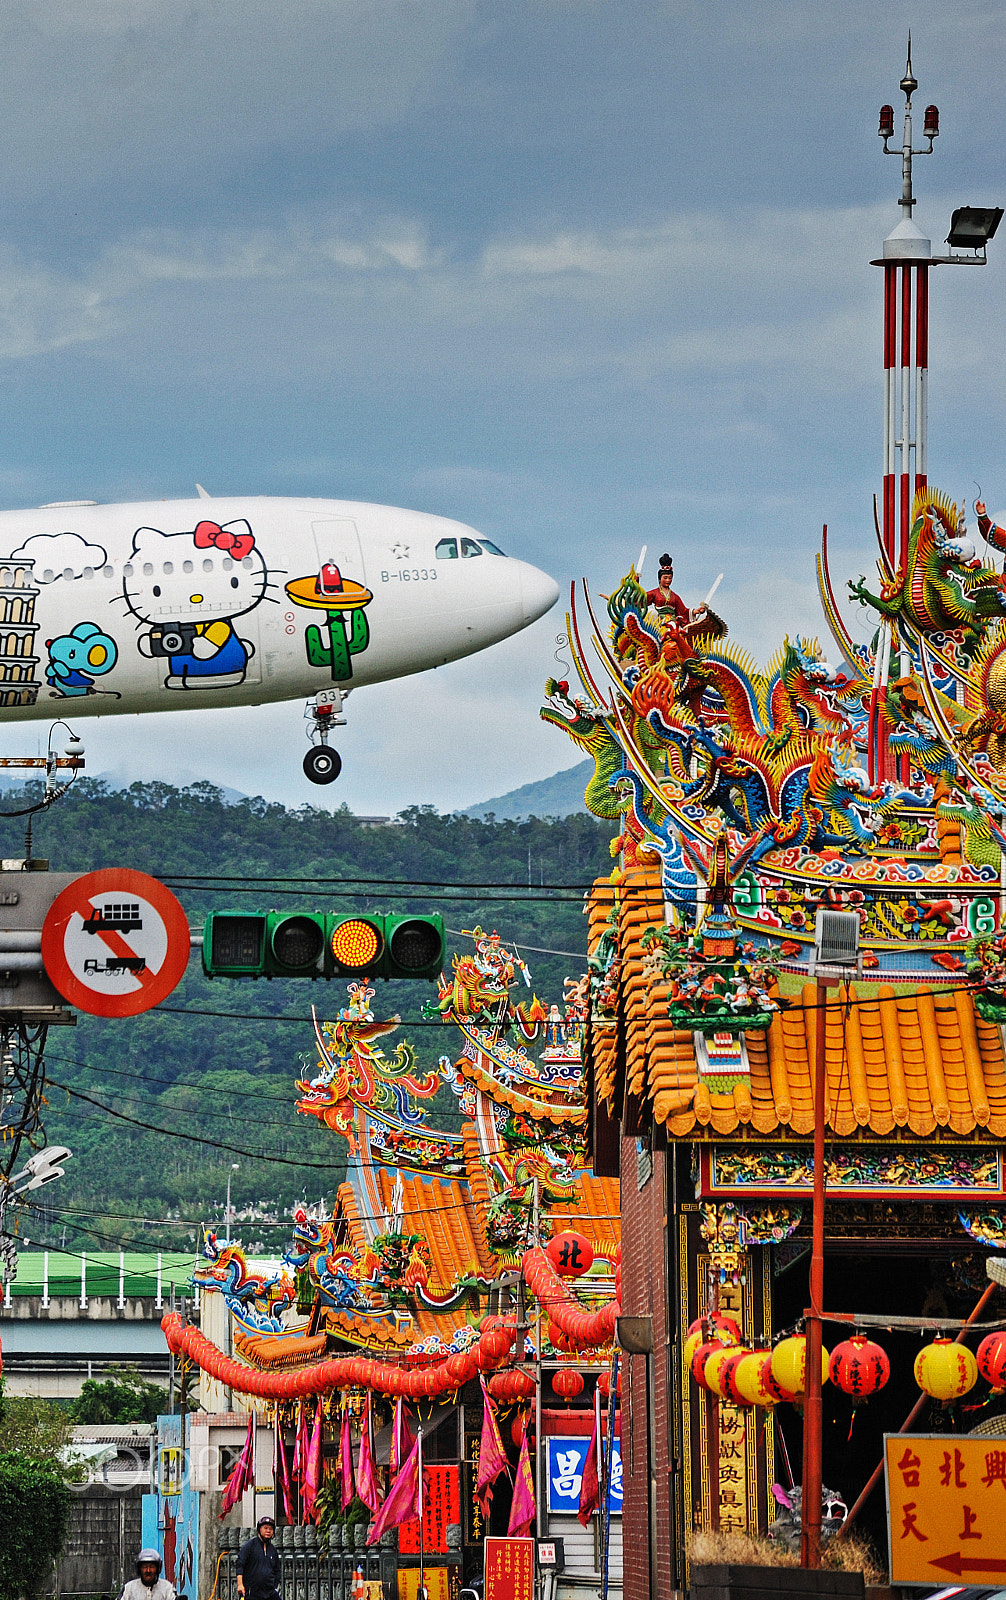 Nikon D700 + Nikon AF-S Nikkor 70-300mm F4.5-5.6G VR sample photo. Hellokitty plane over a chinese style temple photography